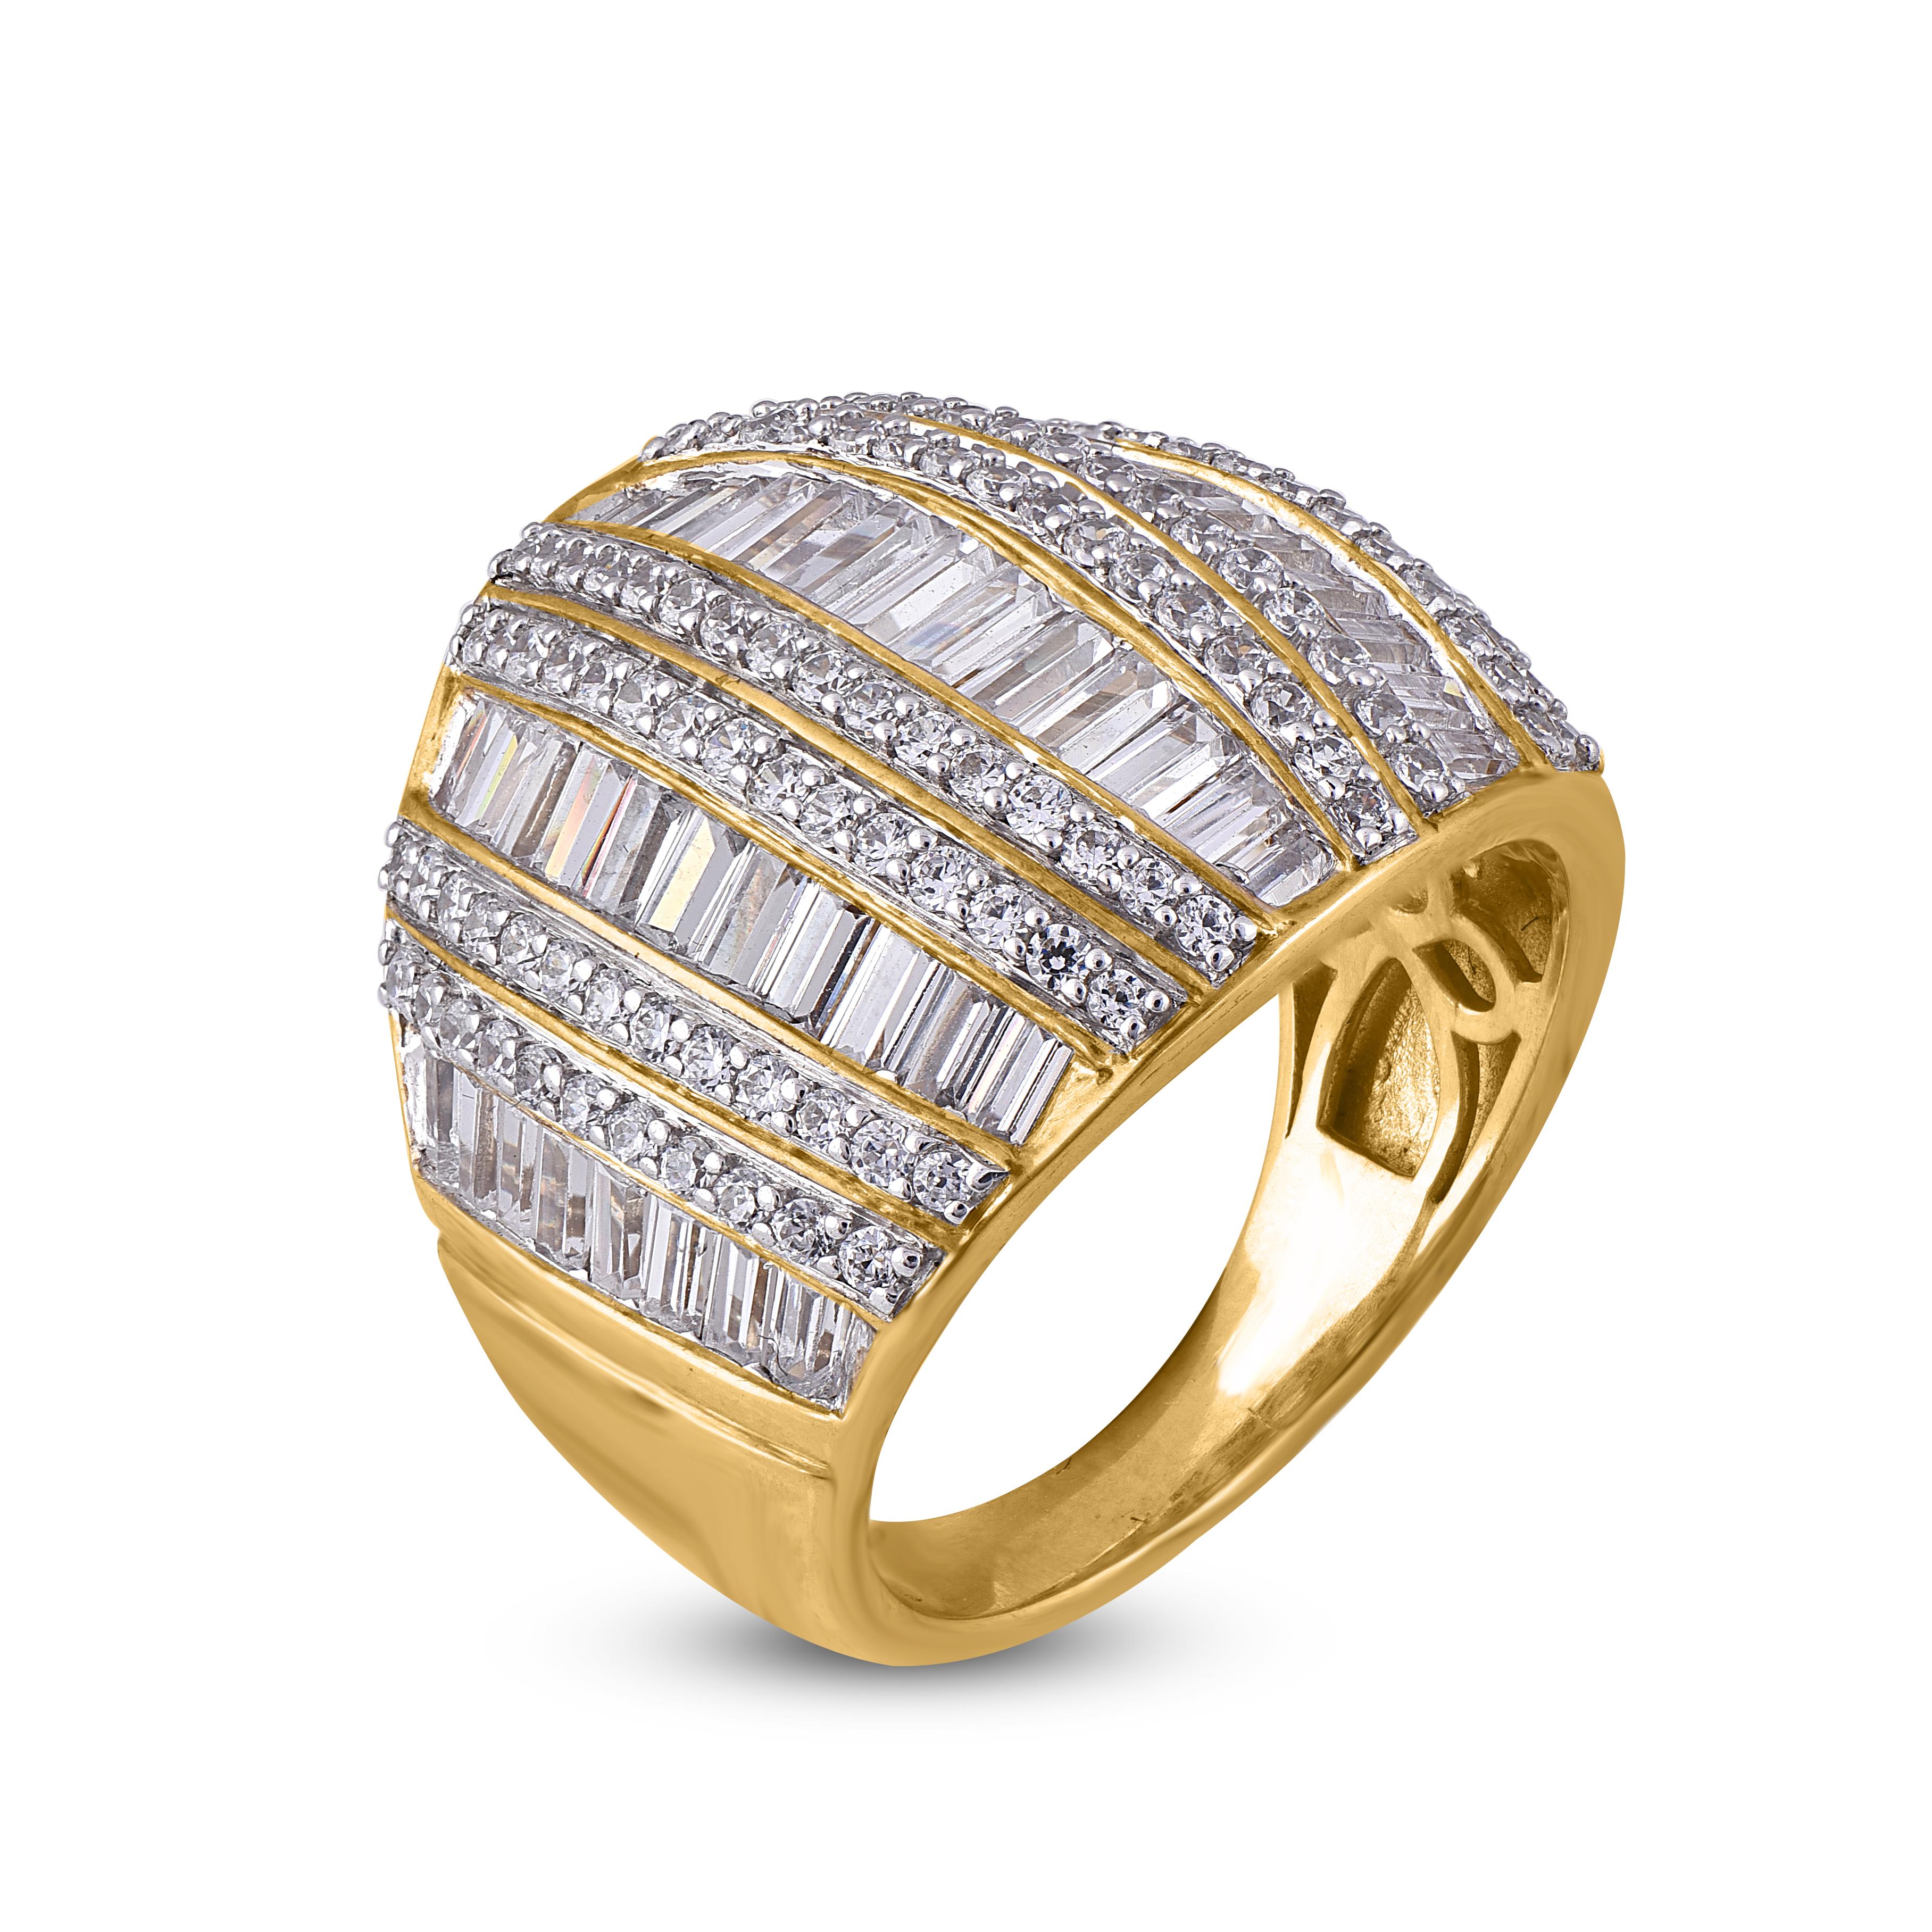 This Designer diamond wedding band ring is accentuated with 14 karat yellow gold with 110 round and 59 baguette diamond beautifully set in prong and channel setting. The total diamond weight is 2.50 Carat and H-I color I2 Clarity.
